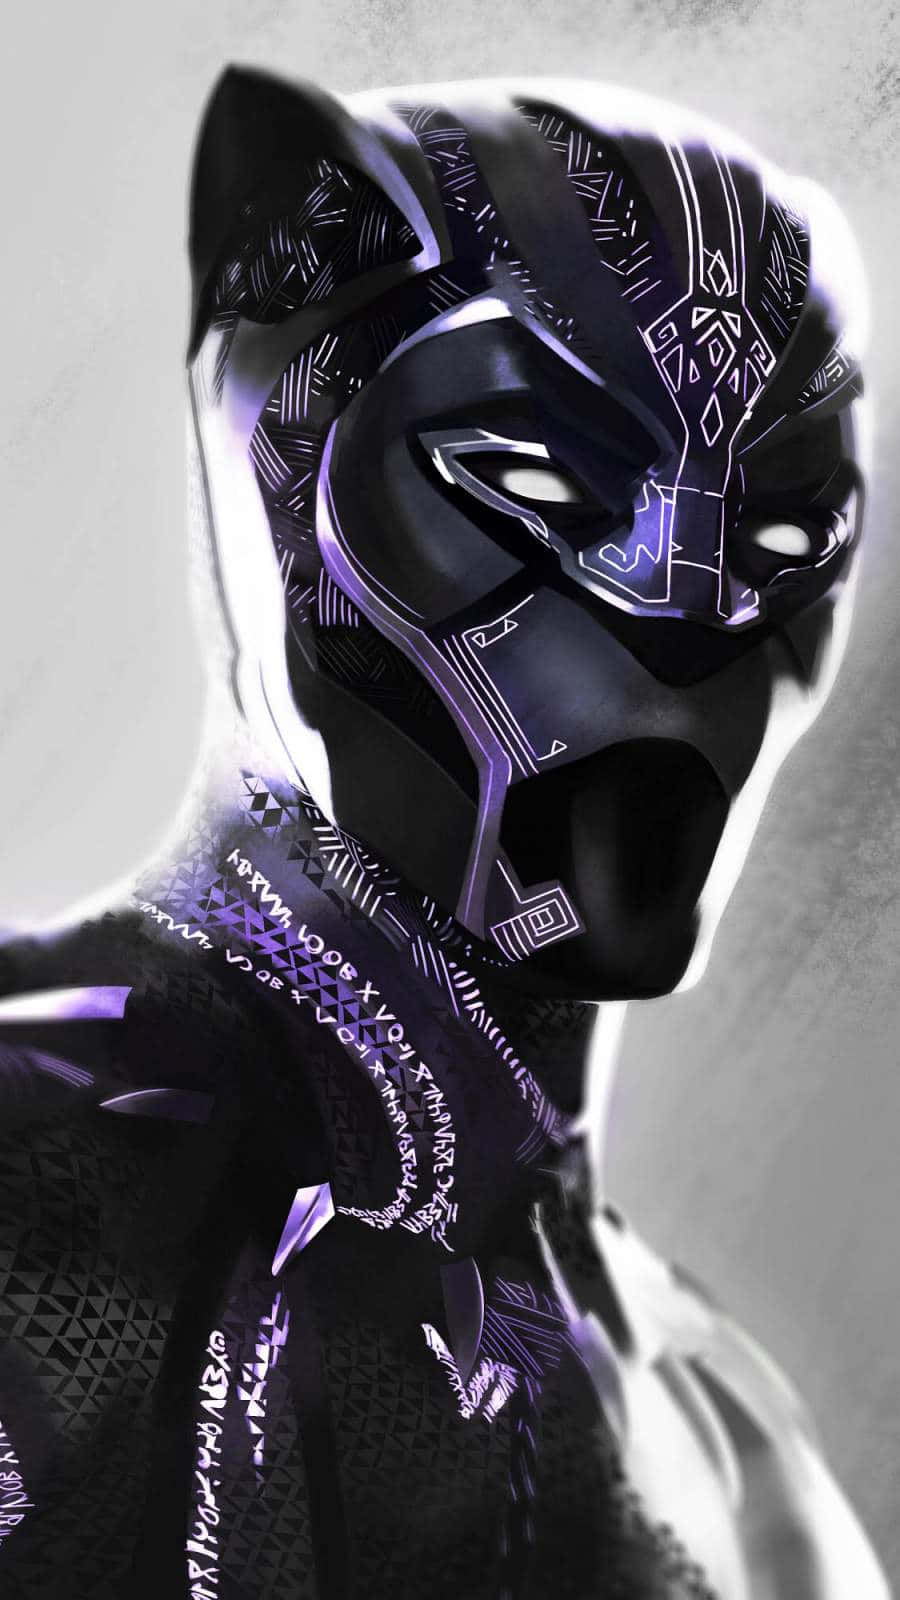 A Superhero Worthy Of Wearing Vibranium Suit in the Fight For Justice" Wallpaper